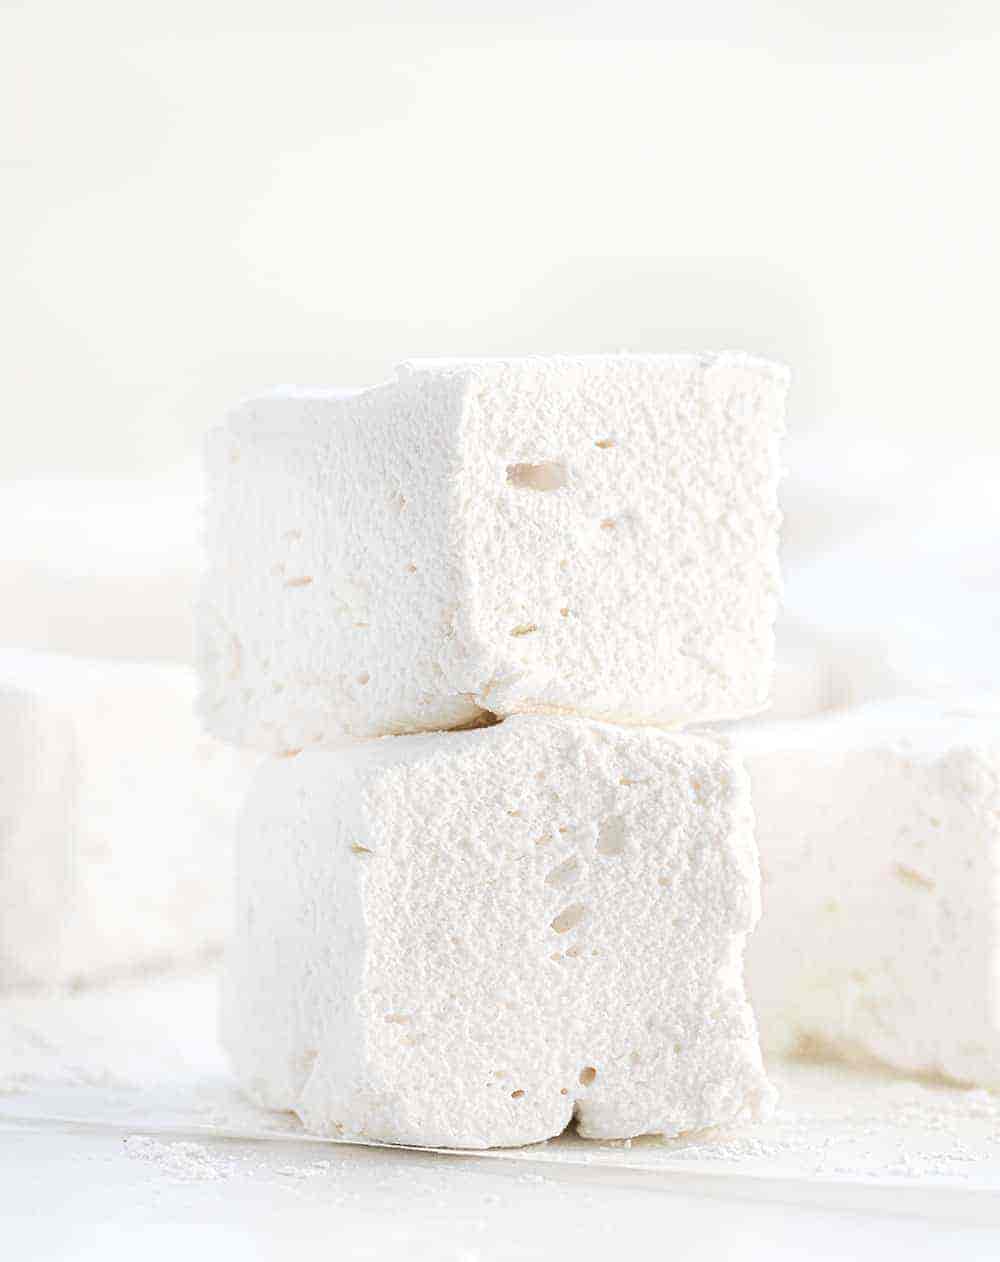 Artisanal Marshmallow Mastery: Crafting Your Own Sweet Creations